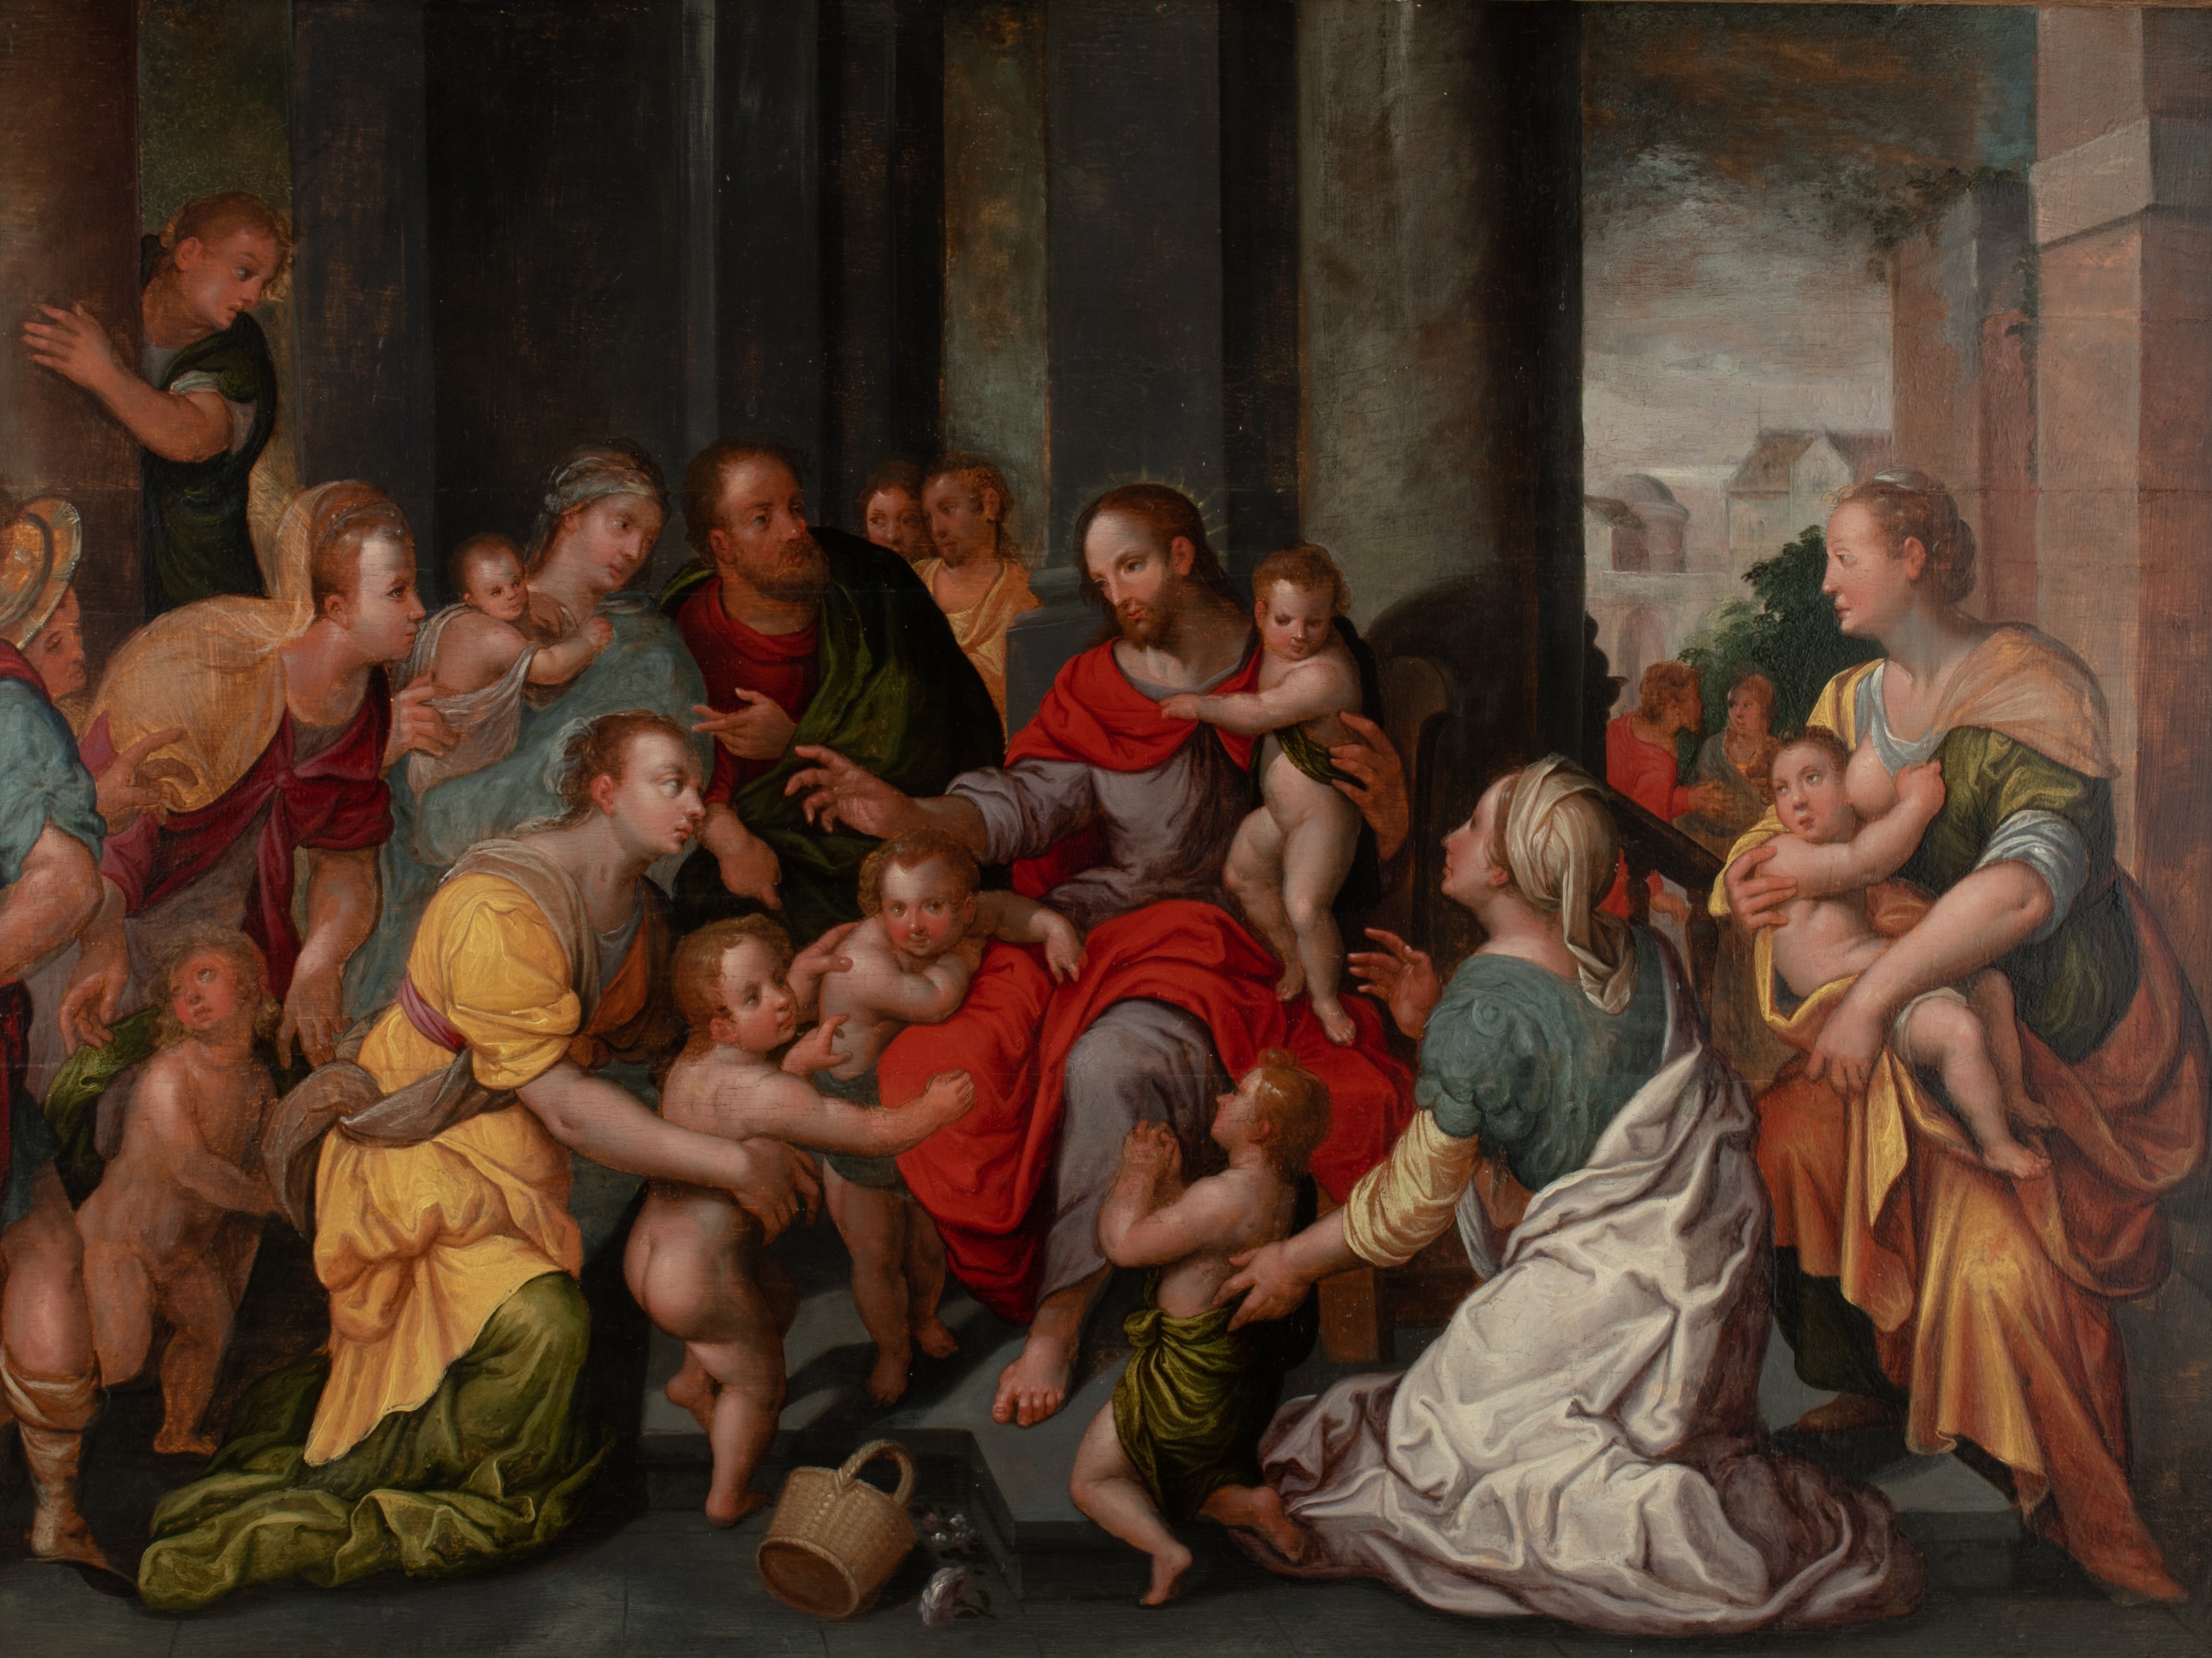 Attributed to Frans Floris, 'Let the children come to me', 16thC, oil on panel, 71 x 95 cm